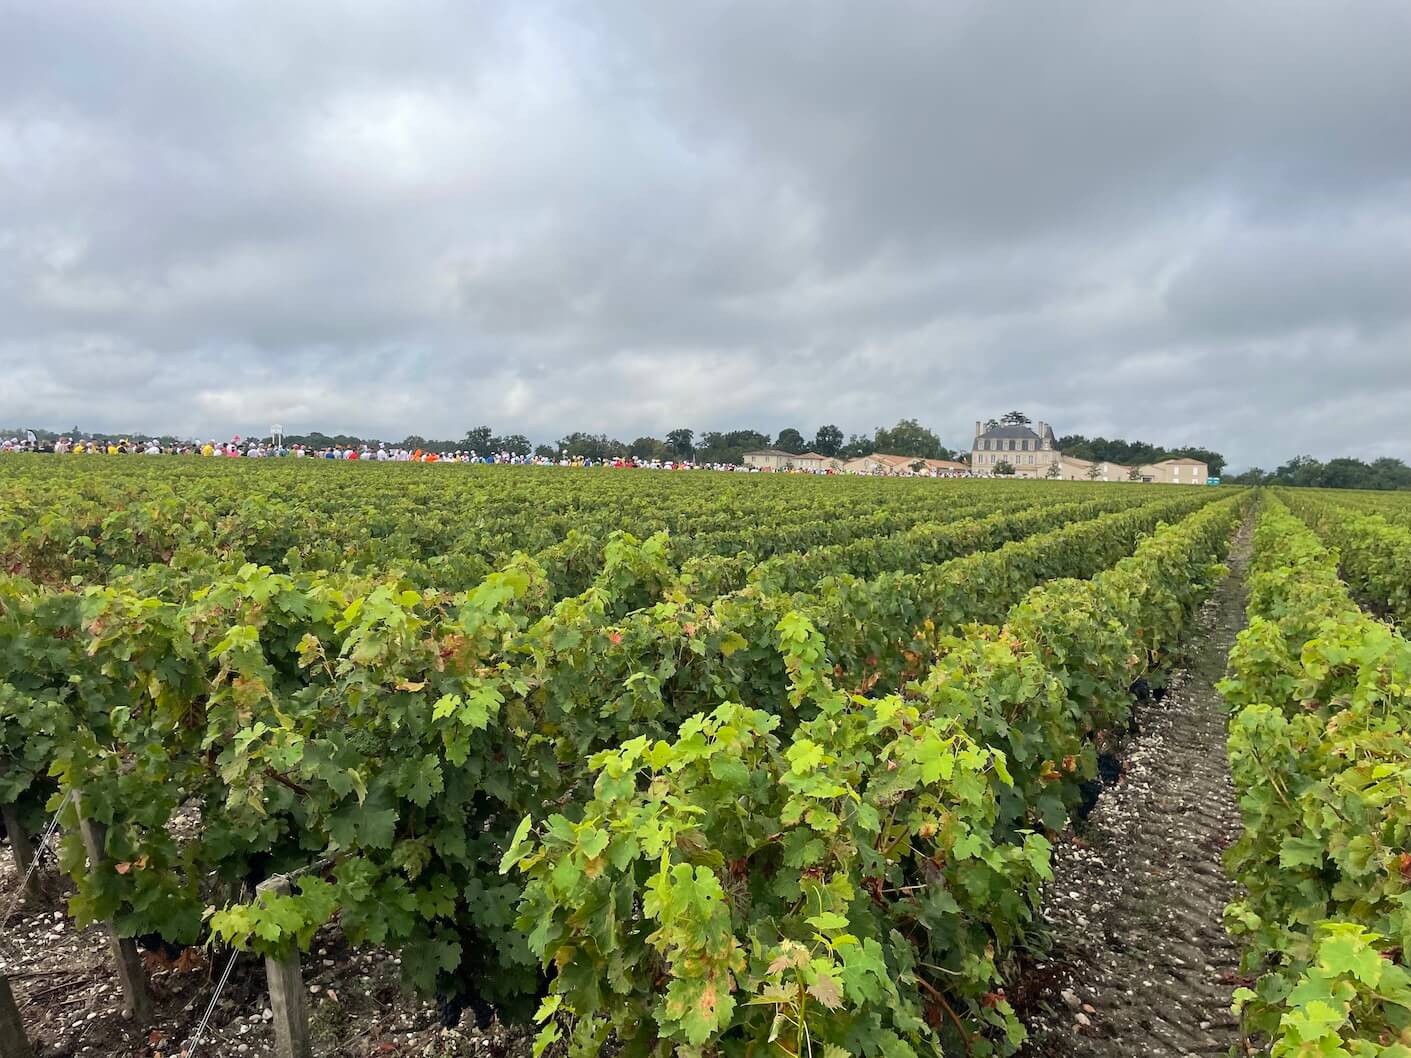 The route of the Marathon du Medoc takes runners through some beautiful vineyards